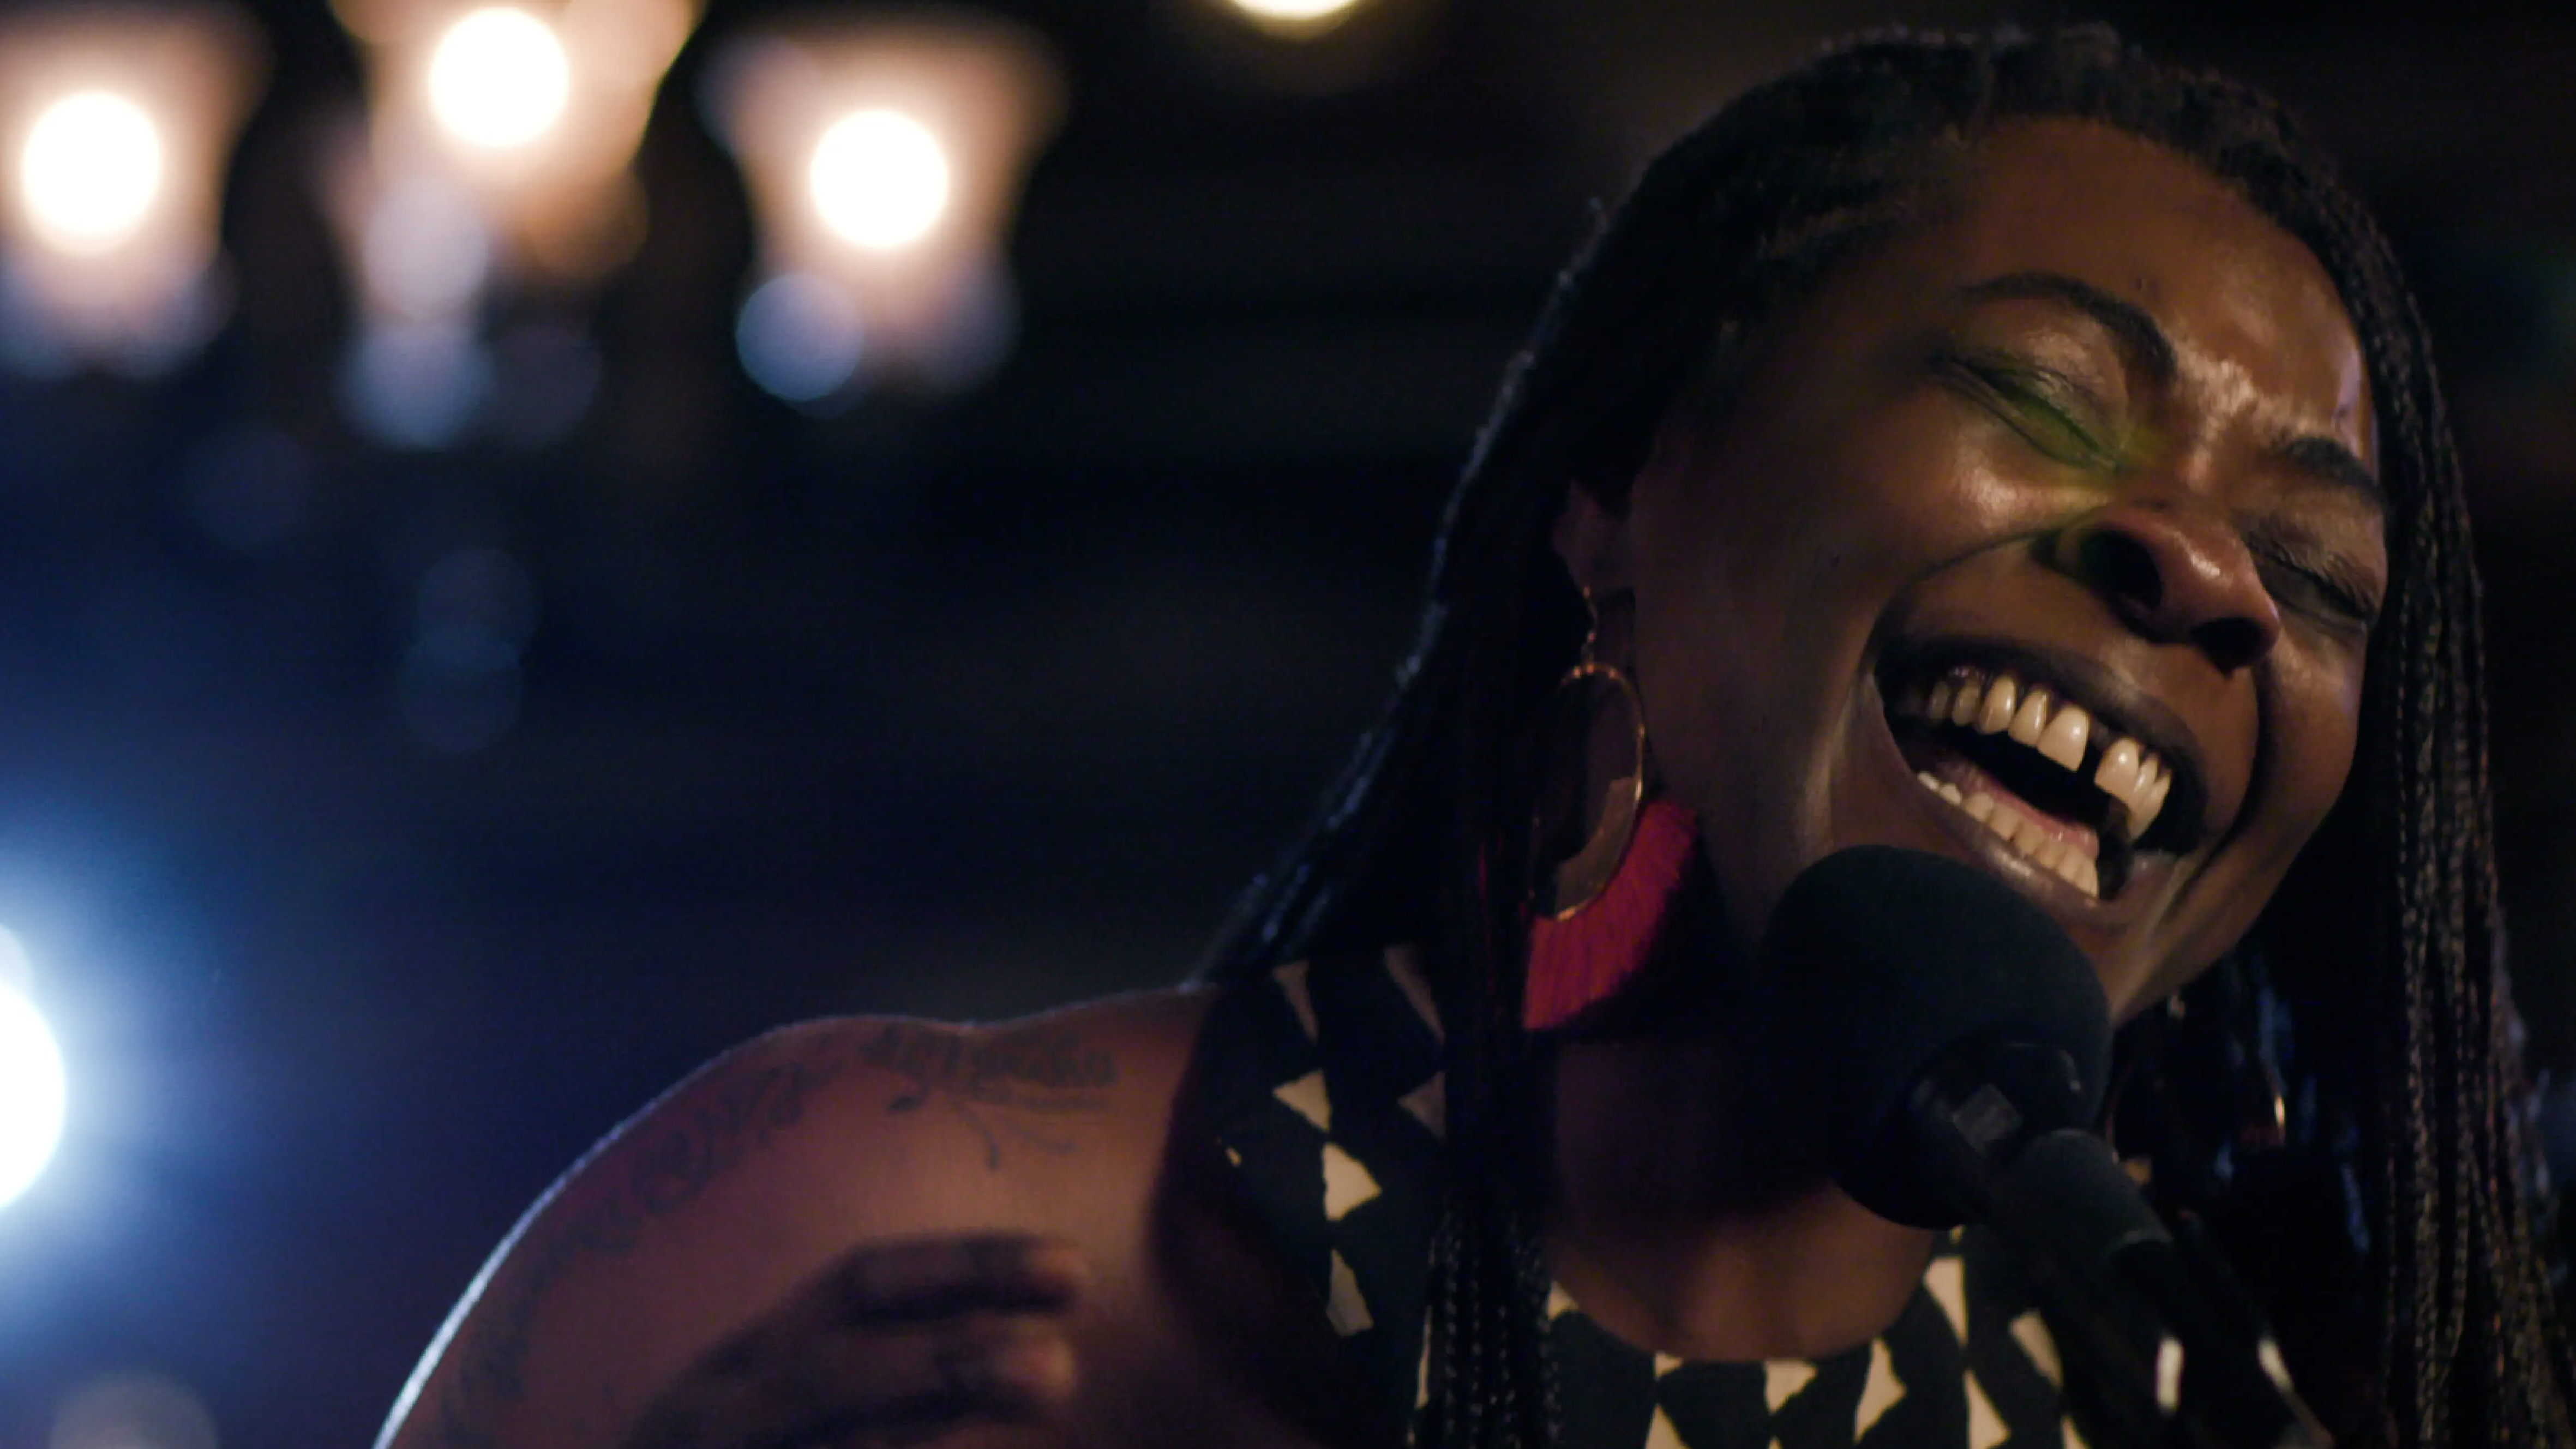 A soulful Buika passionately performing with a joyful expression under warm stage lighting.